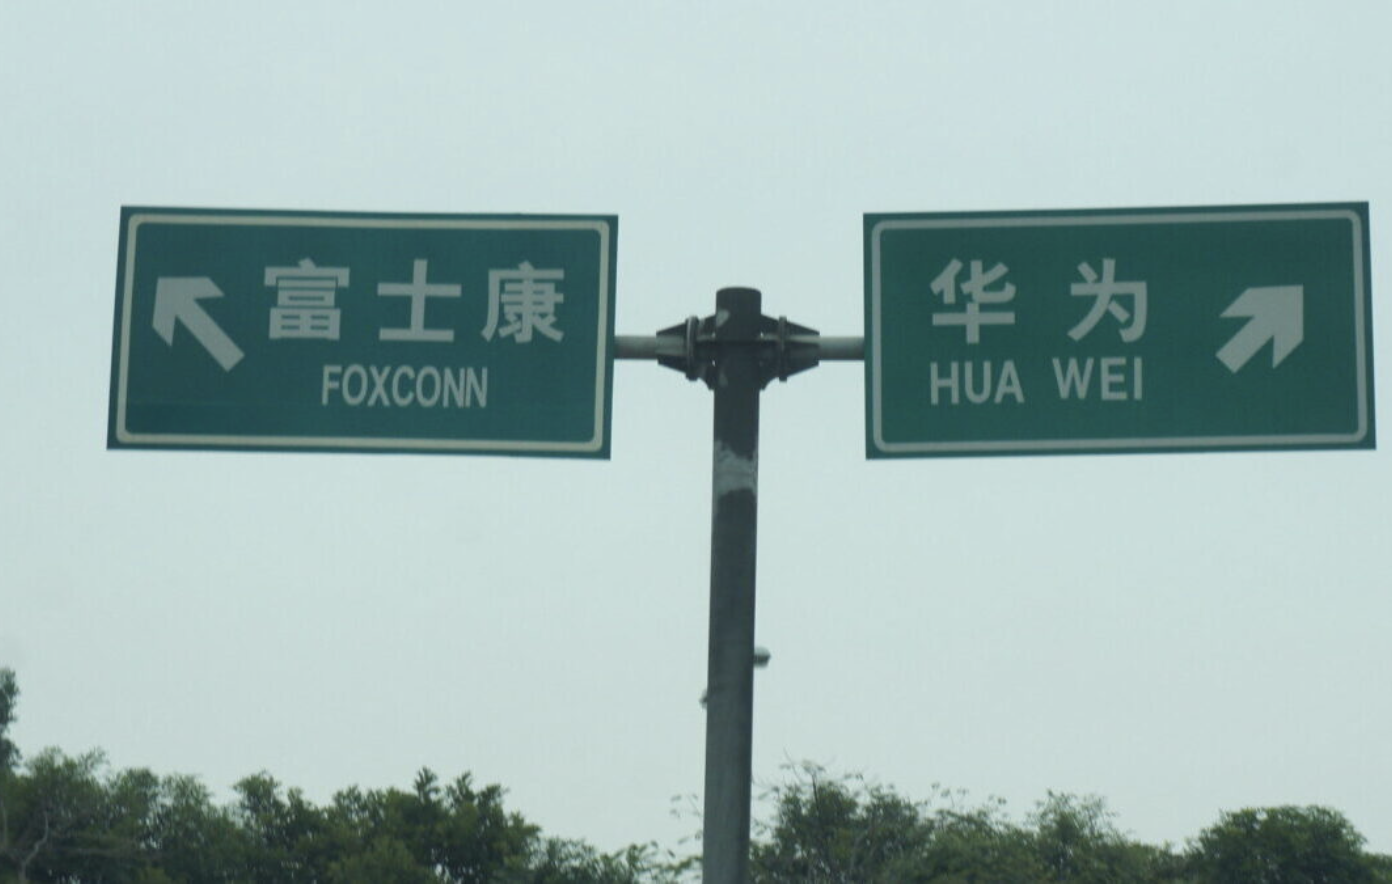 Chinese road sign points to Apple's Foxconn manufacturing plant